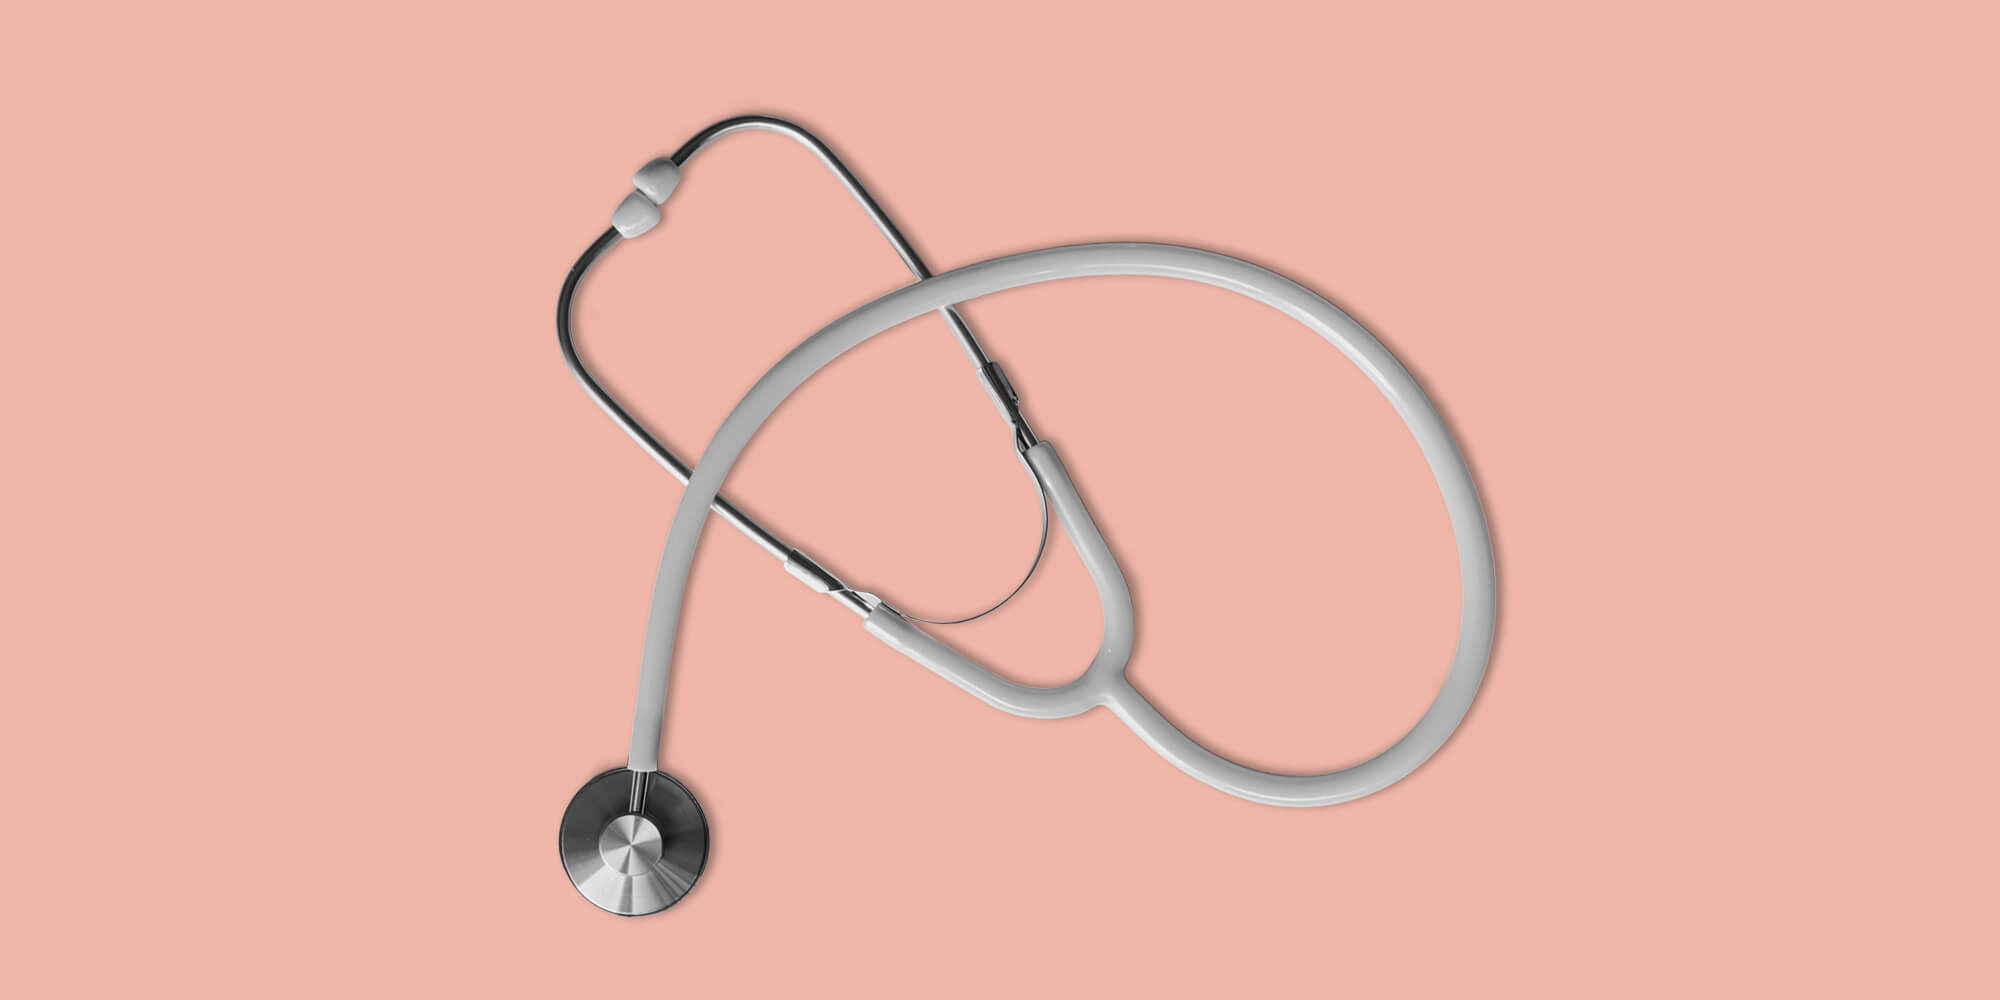 Stethoscope on peach background. Naltrexone side effects